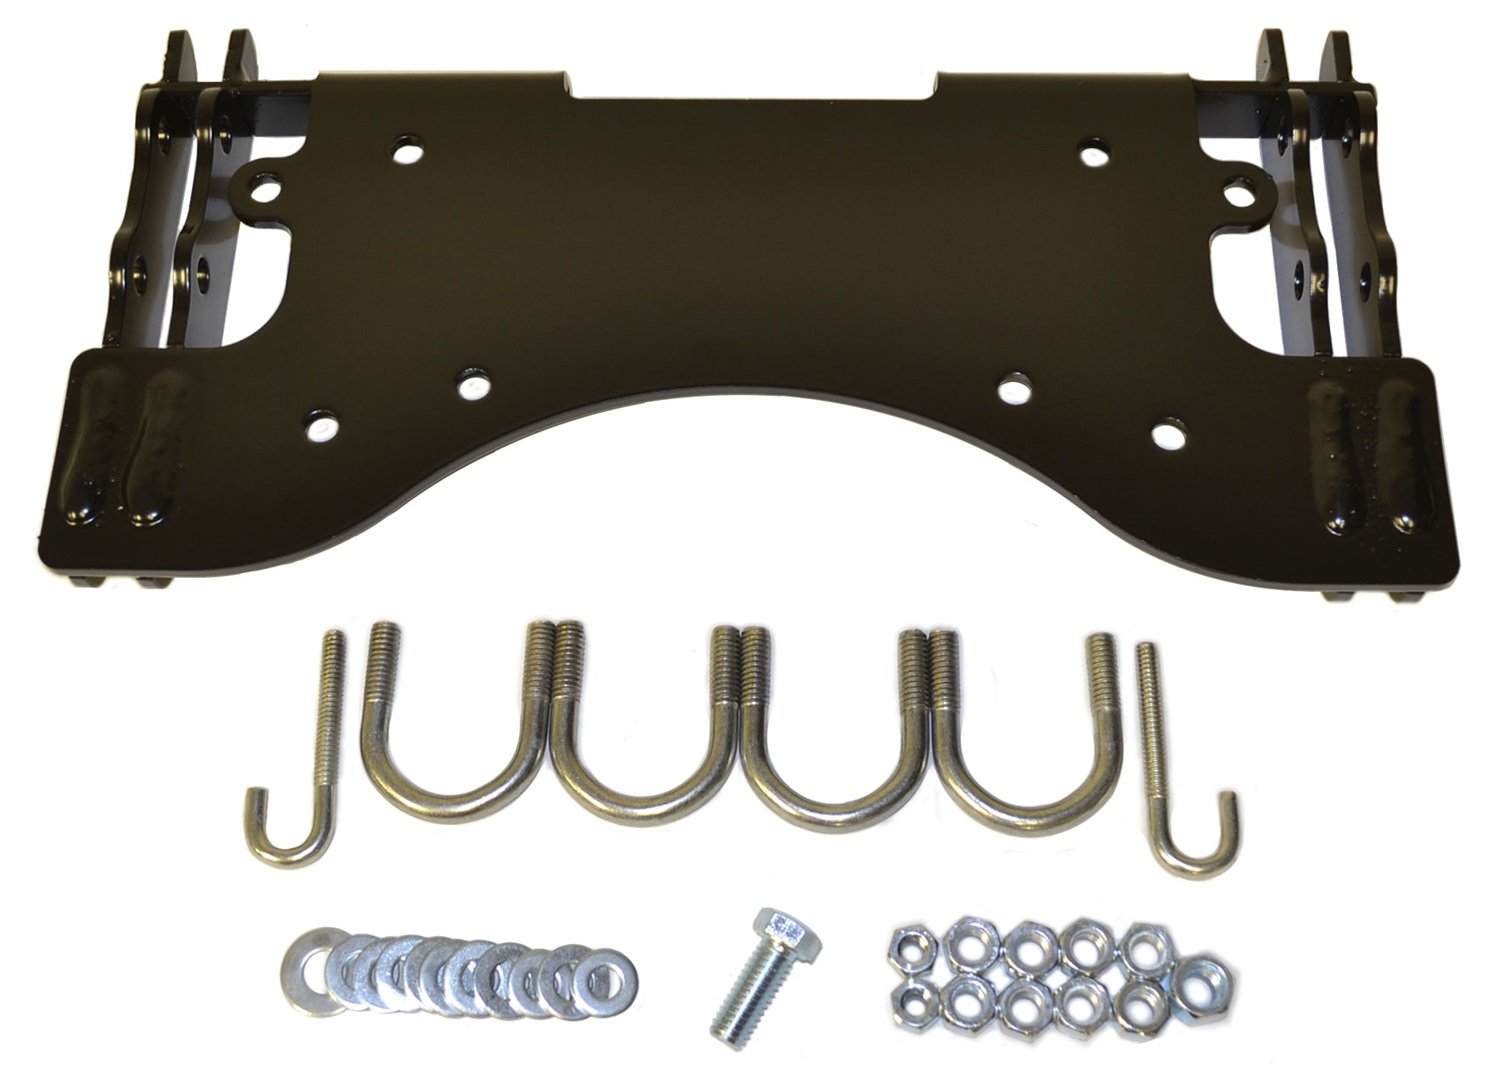 Picture of Warn 61611 Plow System Center Mount Kit